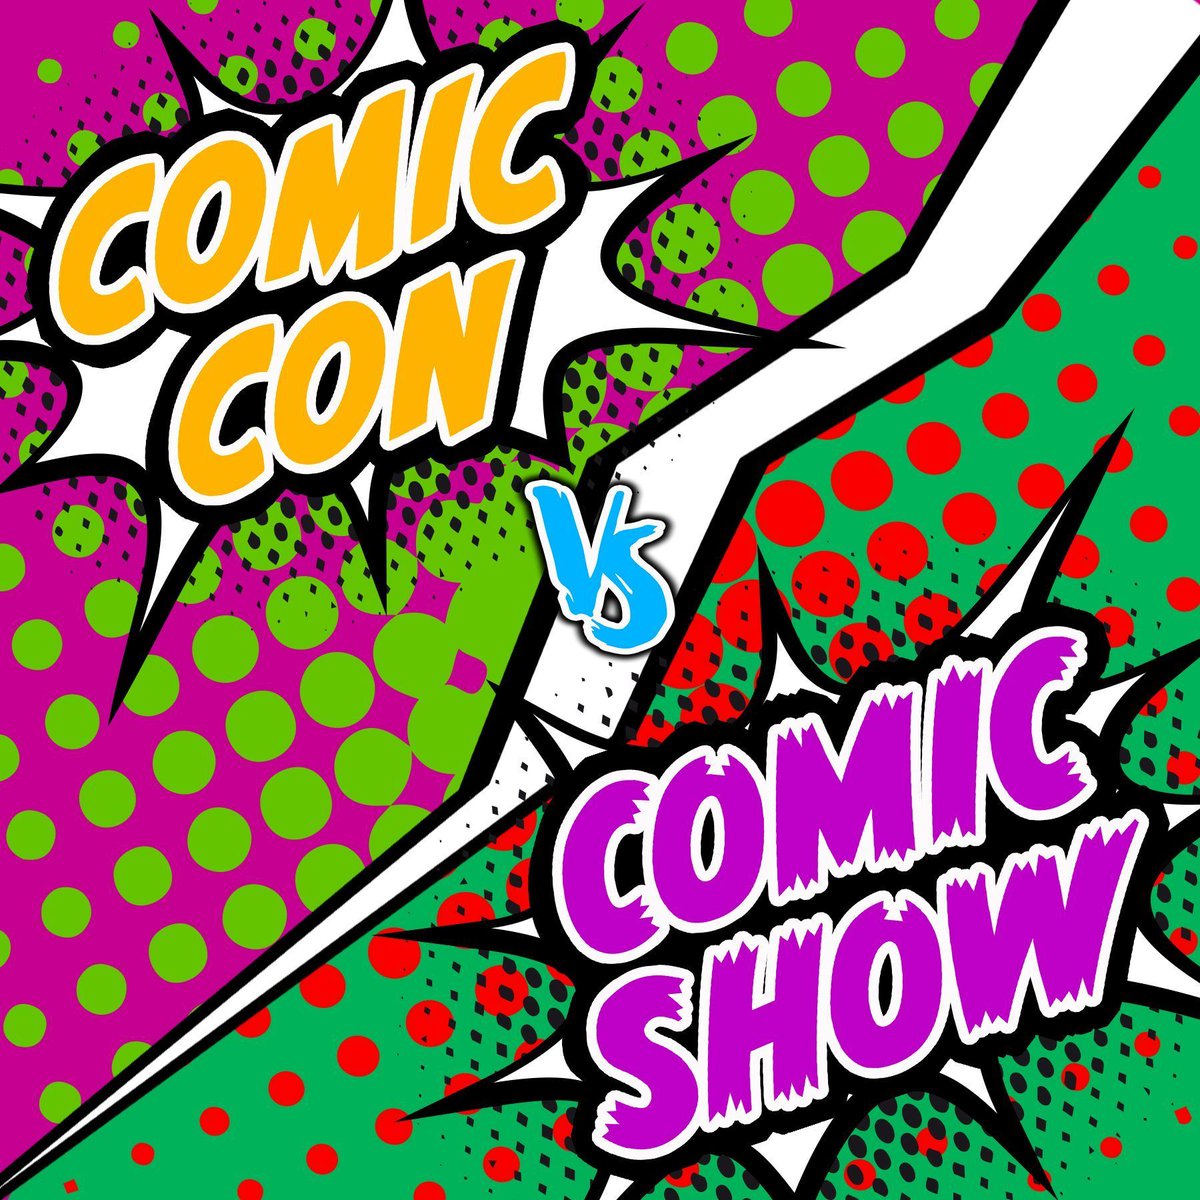 Everyone has their opinion on what a #comiccon or #comicshow means to them. Which do you prefer? Travis compares the two and explains why he likes each on the #BruneauBlog at buff.ly/3y3L79w!